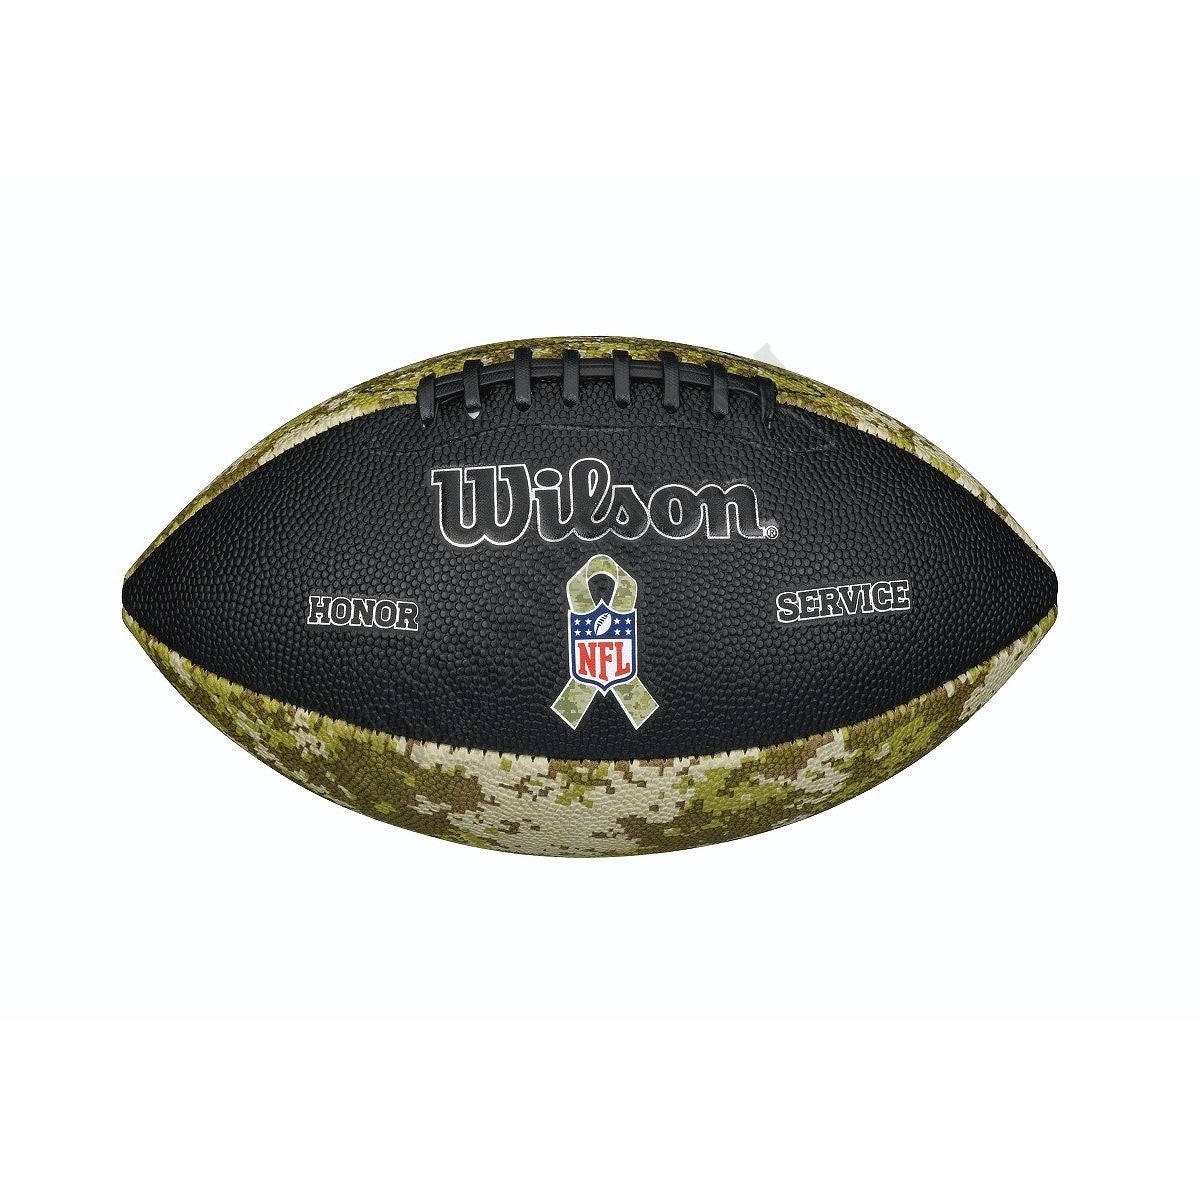 NFL SALUTE TO SERVICE HONOR FOOTBALL - JUNIOR - Wilson Discount Store - -0